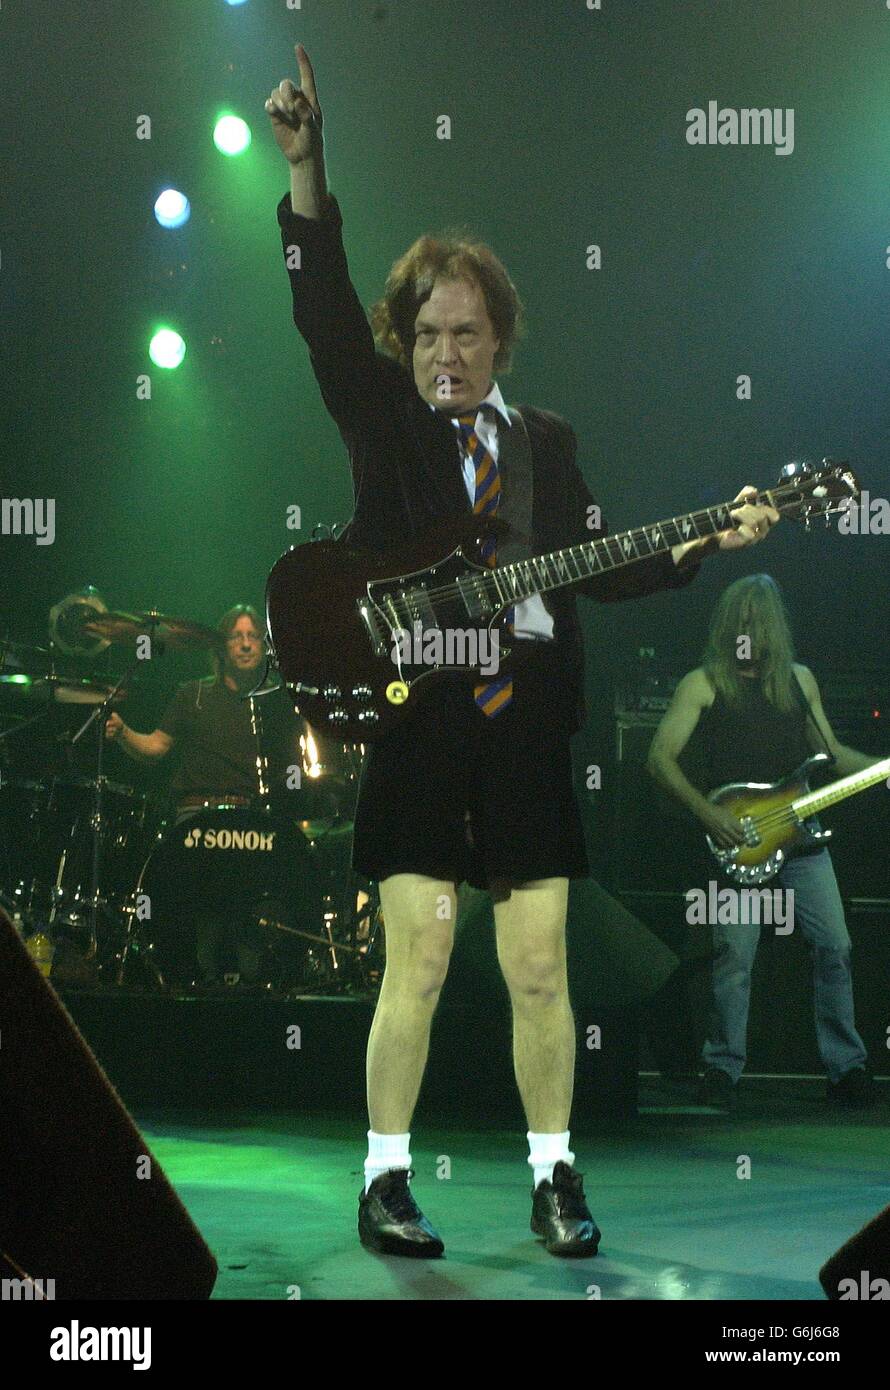 Australian heavymetal band AC/DC's lead guitarist Angus Young performing live in concert at the Carling Hammersmith Apollo in west London. Stock Photo